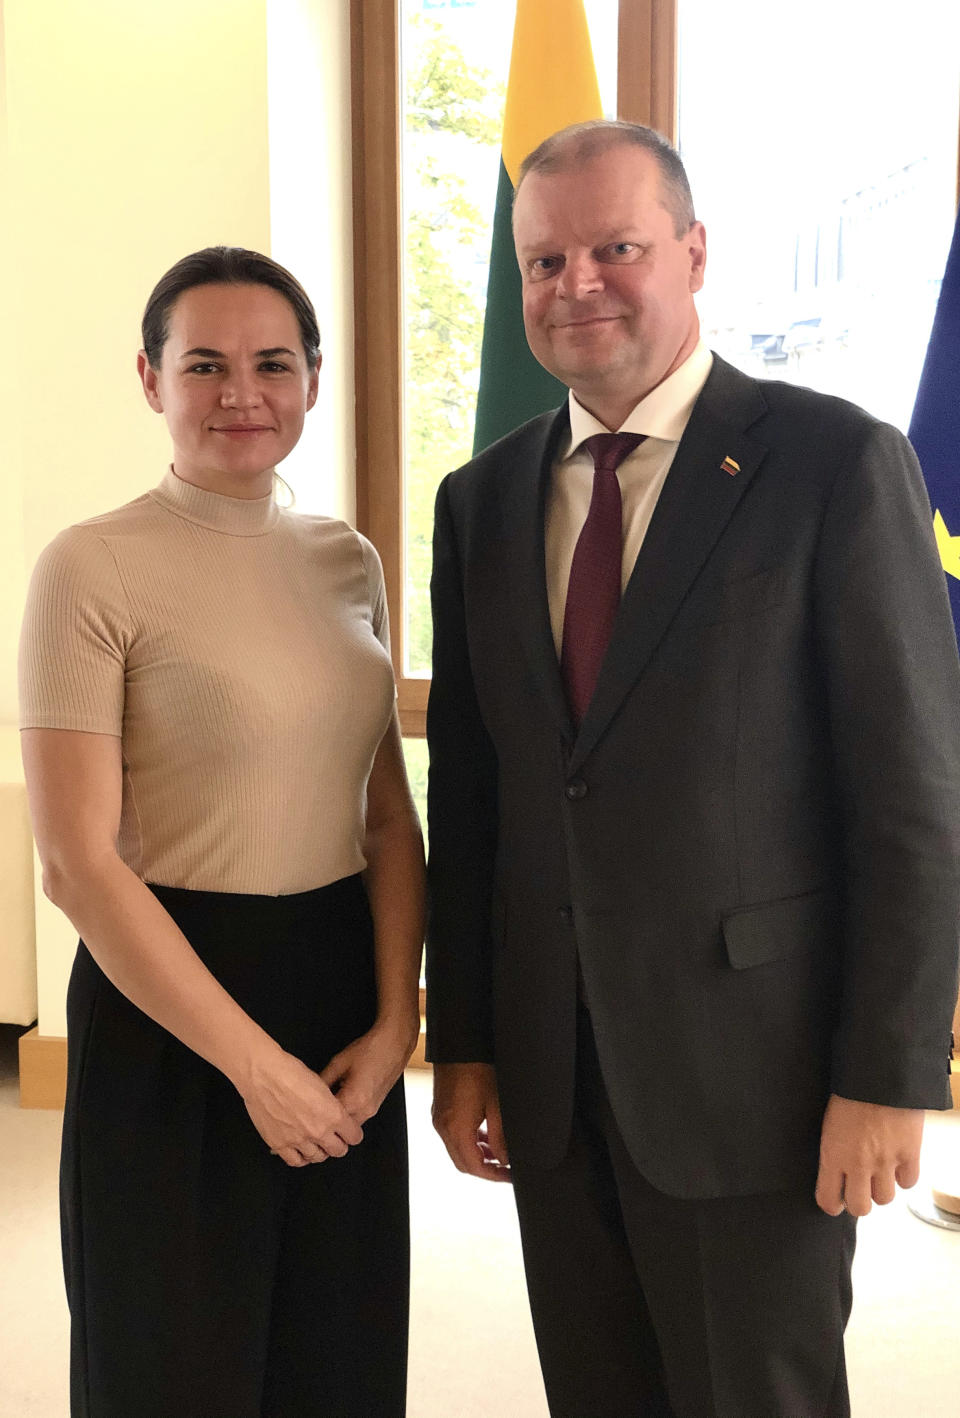 Belarusian opposition candidate Svetlana Tikhanovskaya, left, meets with Lithuanian Prime Minister Saulius Skvernelis, in Vilnius, Lithuania, Thursday Aug. 20, 2020. Tikhanovskaya fled from Belarus following the disputed Aug. 9, presidential election, that forced her into exile, although Lithuania's Skvernelis has declared she has the backing of the Baltic countries.(Lithuanian Prime Minister's Office via AP)